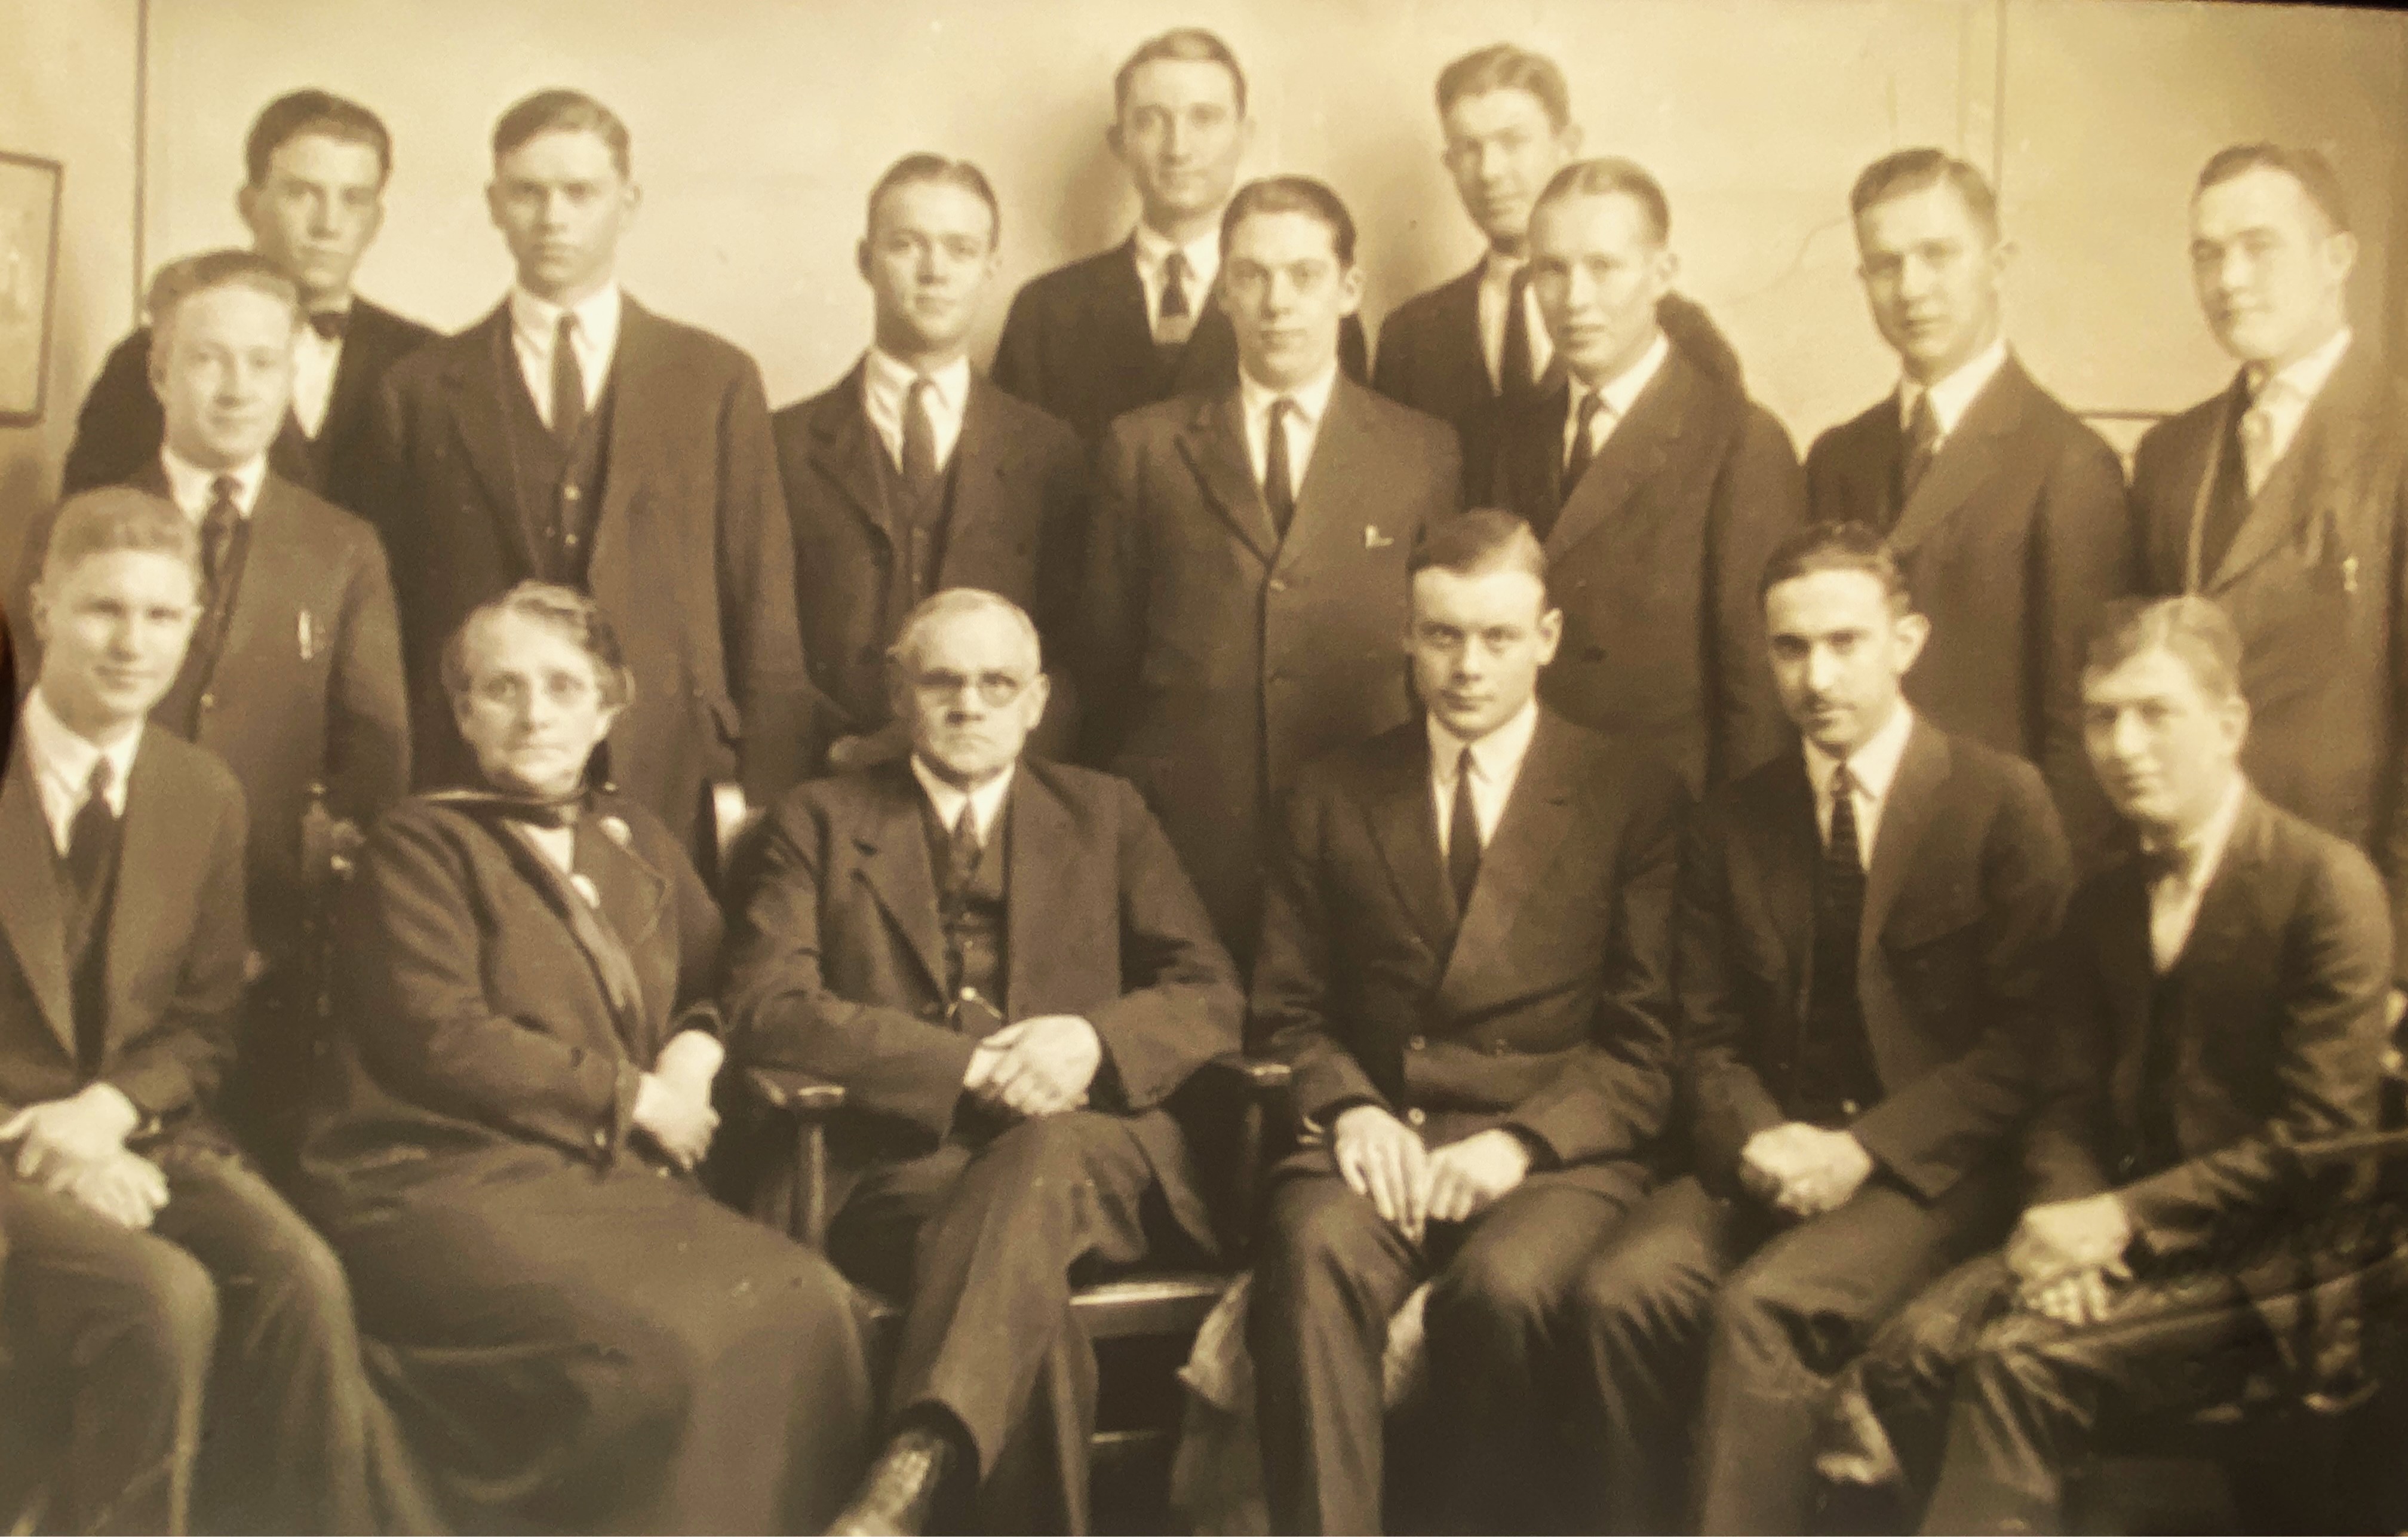 Harold Leroy White – England Mission with other Missionaries,  1925 October 18